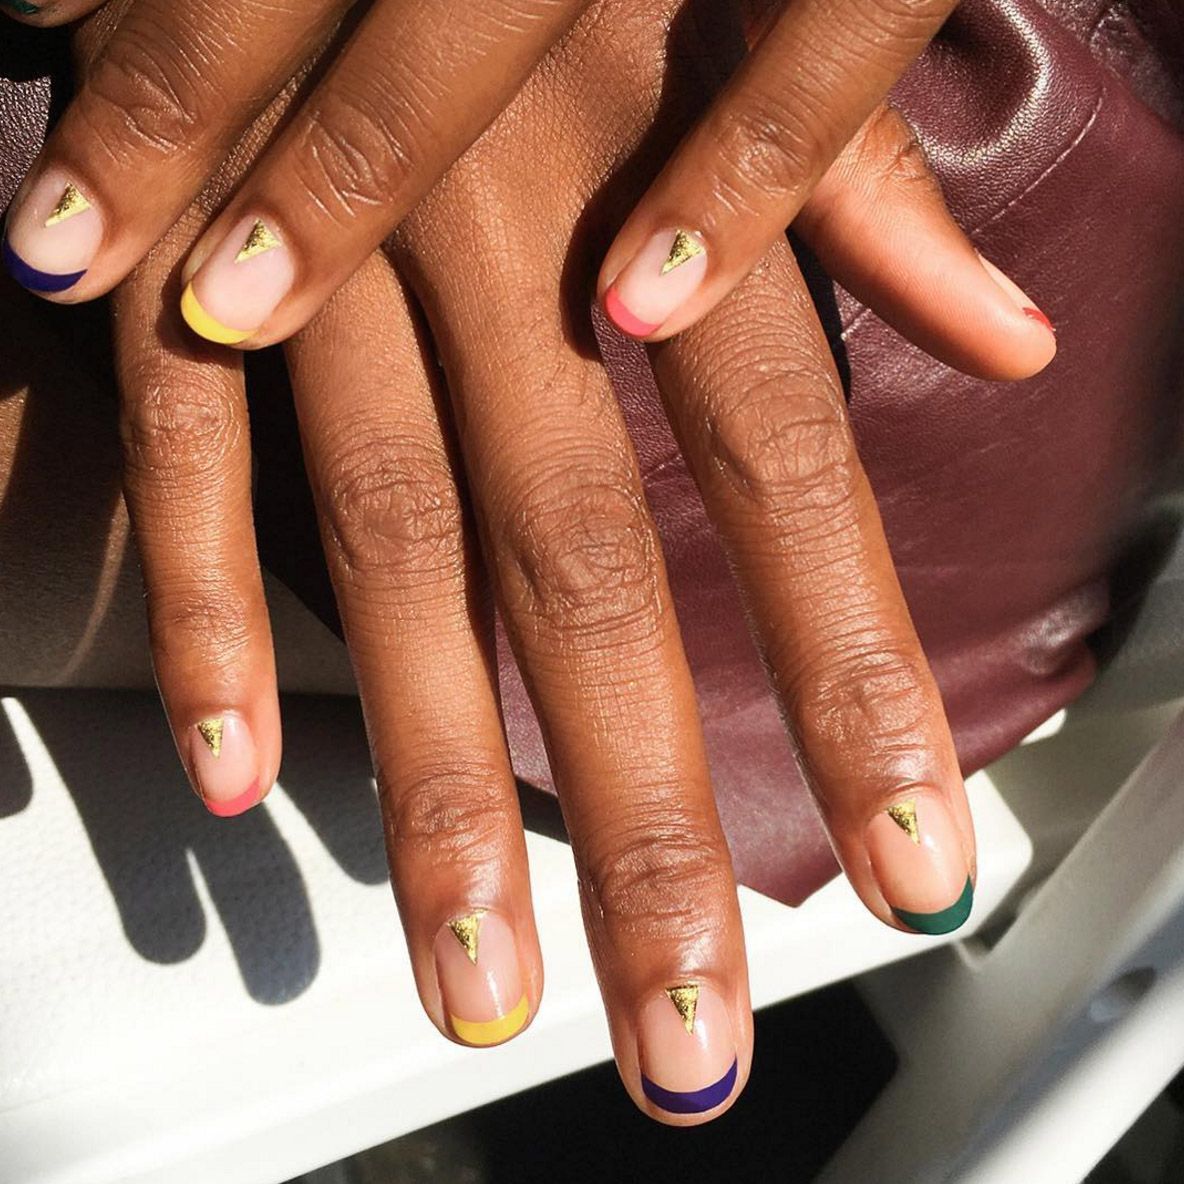 2017 Nail Trends to Try - Best Nail Trends for 2017